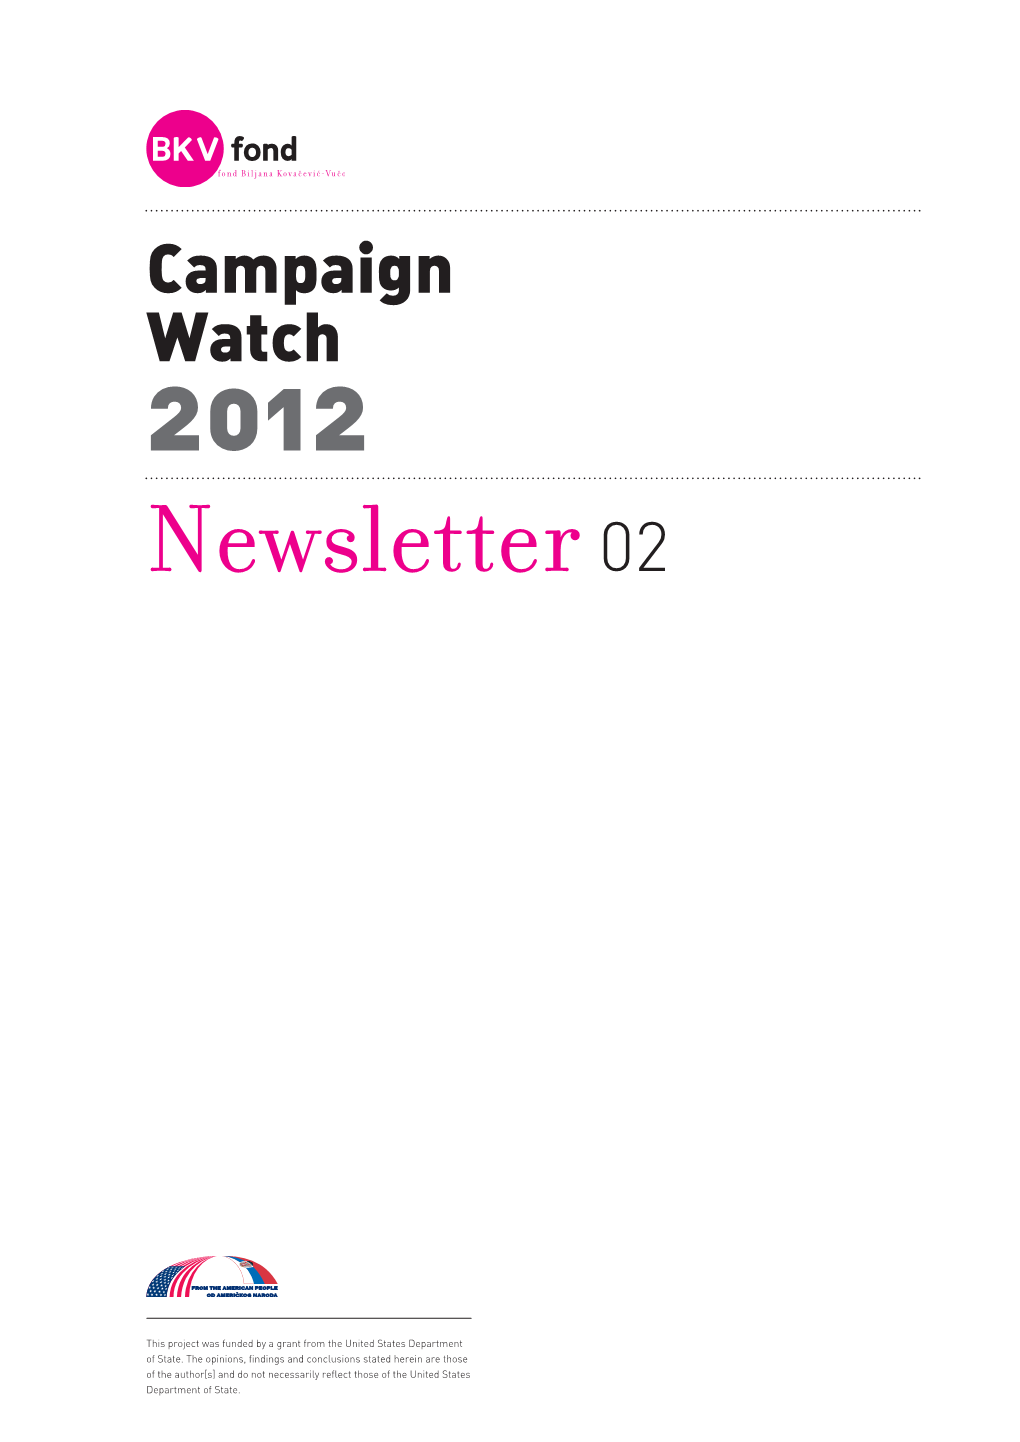 Newsletter No. 2, March 30, 2012